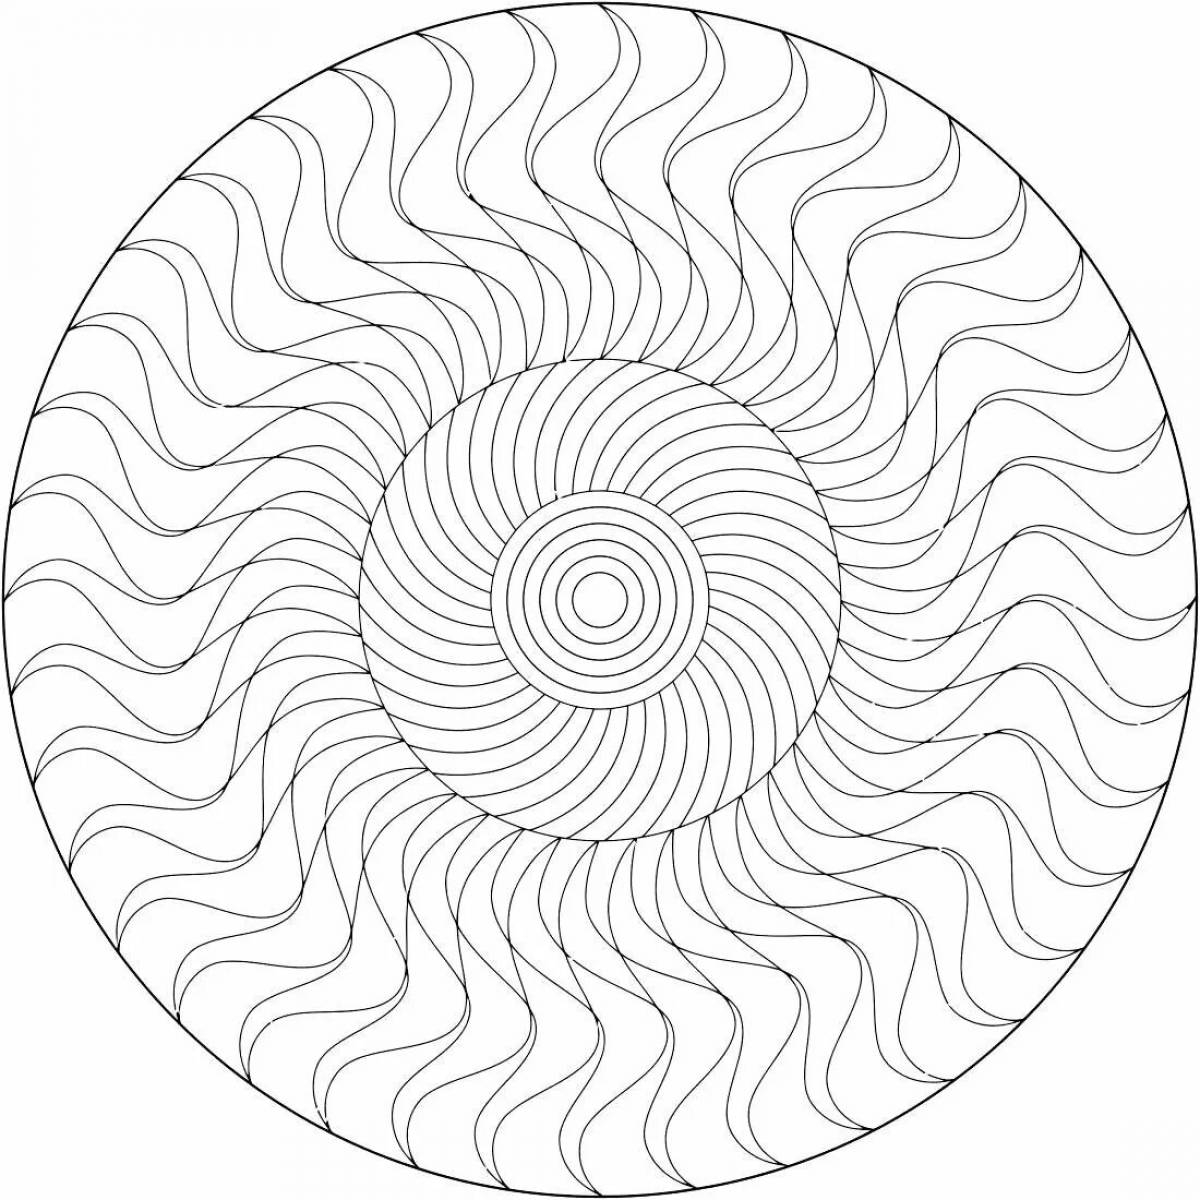 Program #2 spiral according to its own photo